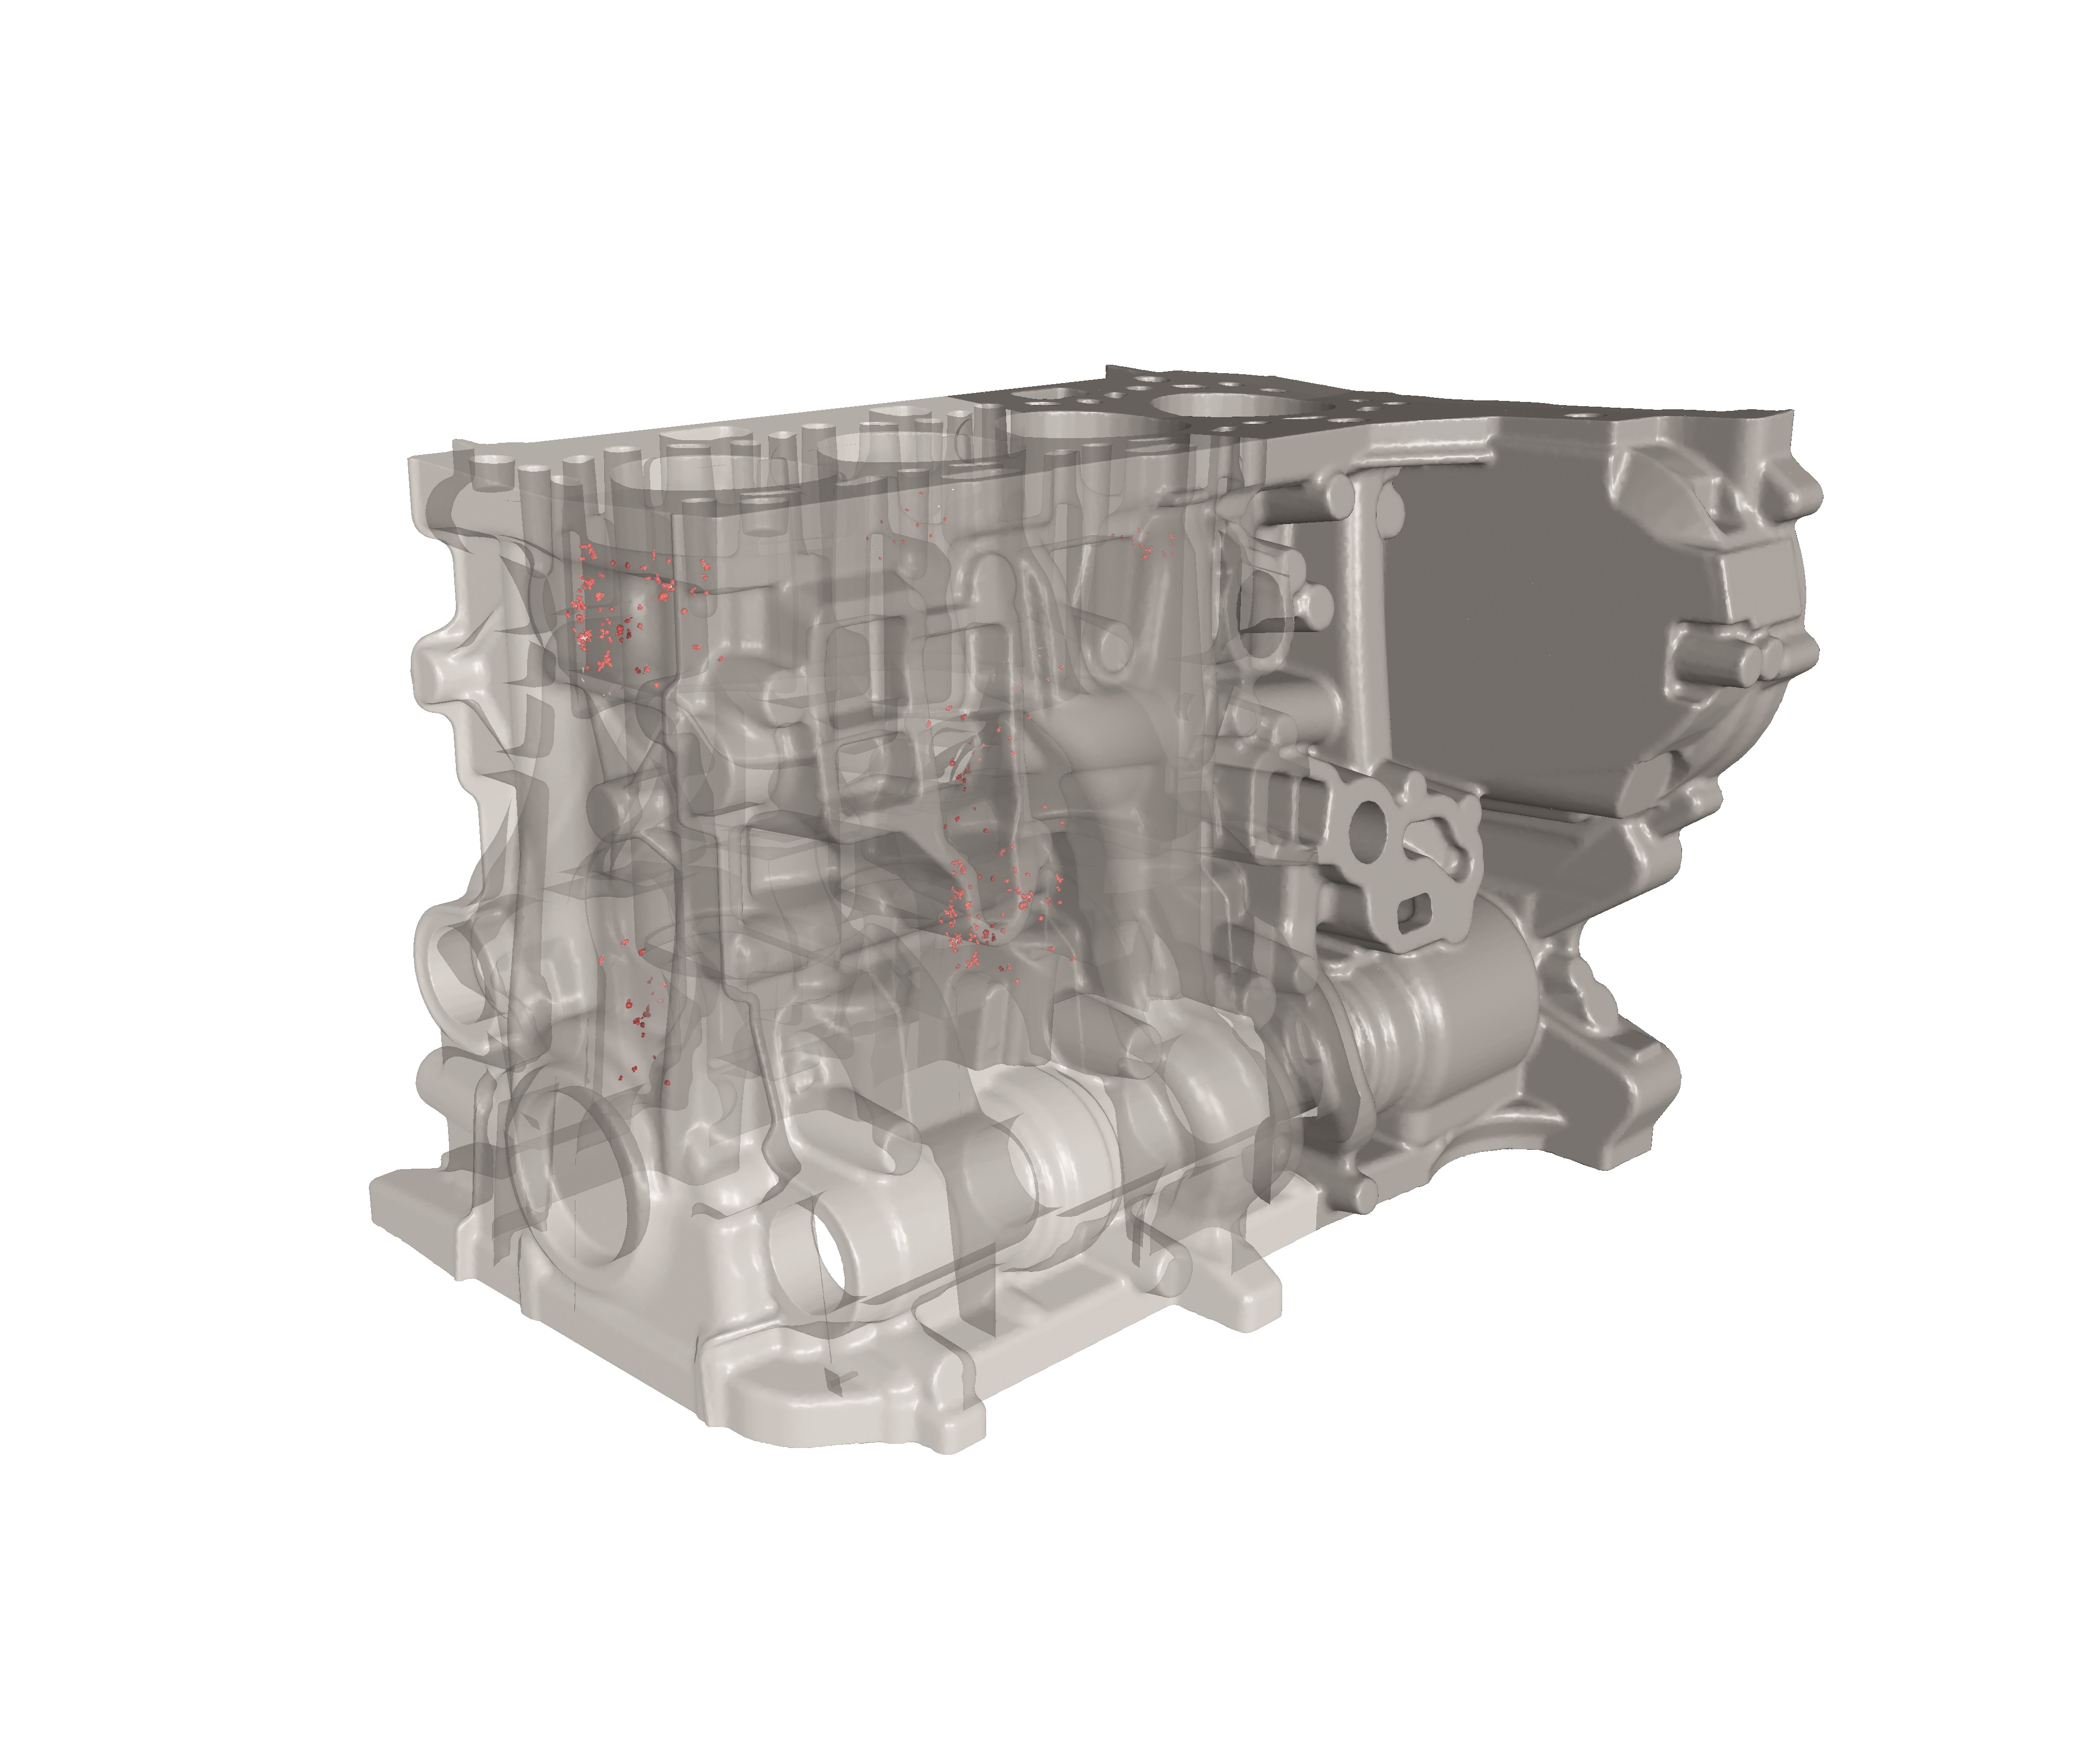 X-ray computer tomography of an engine block